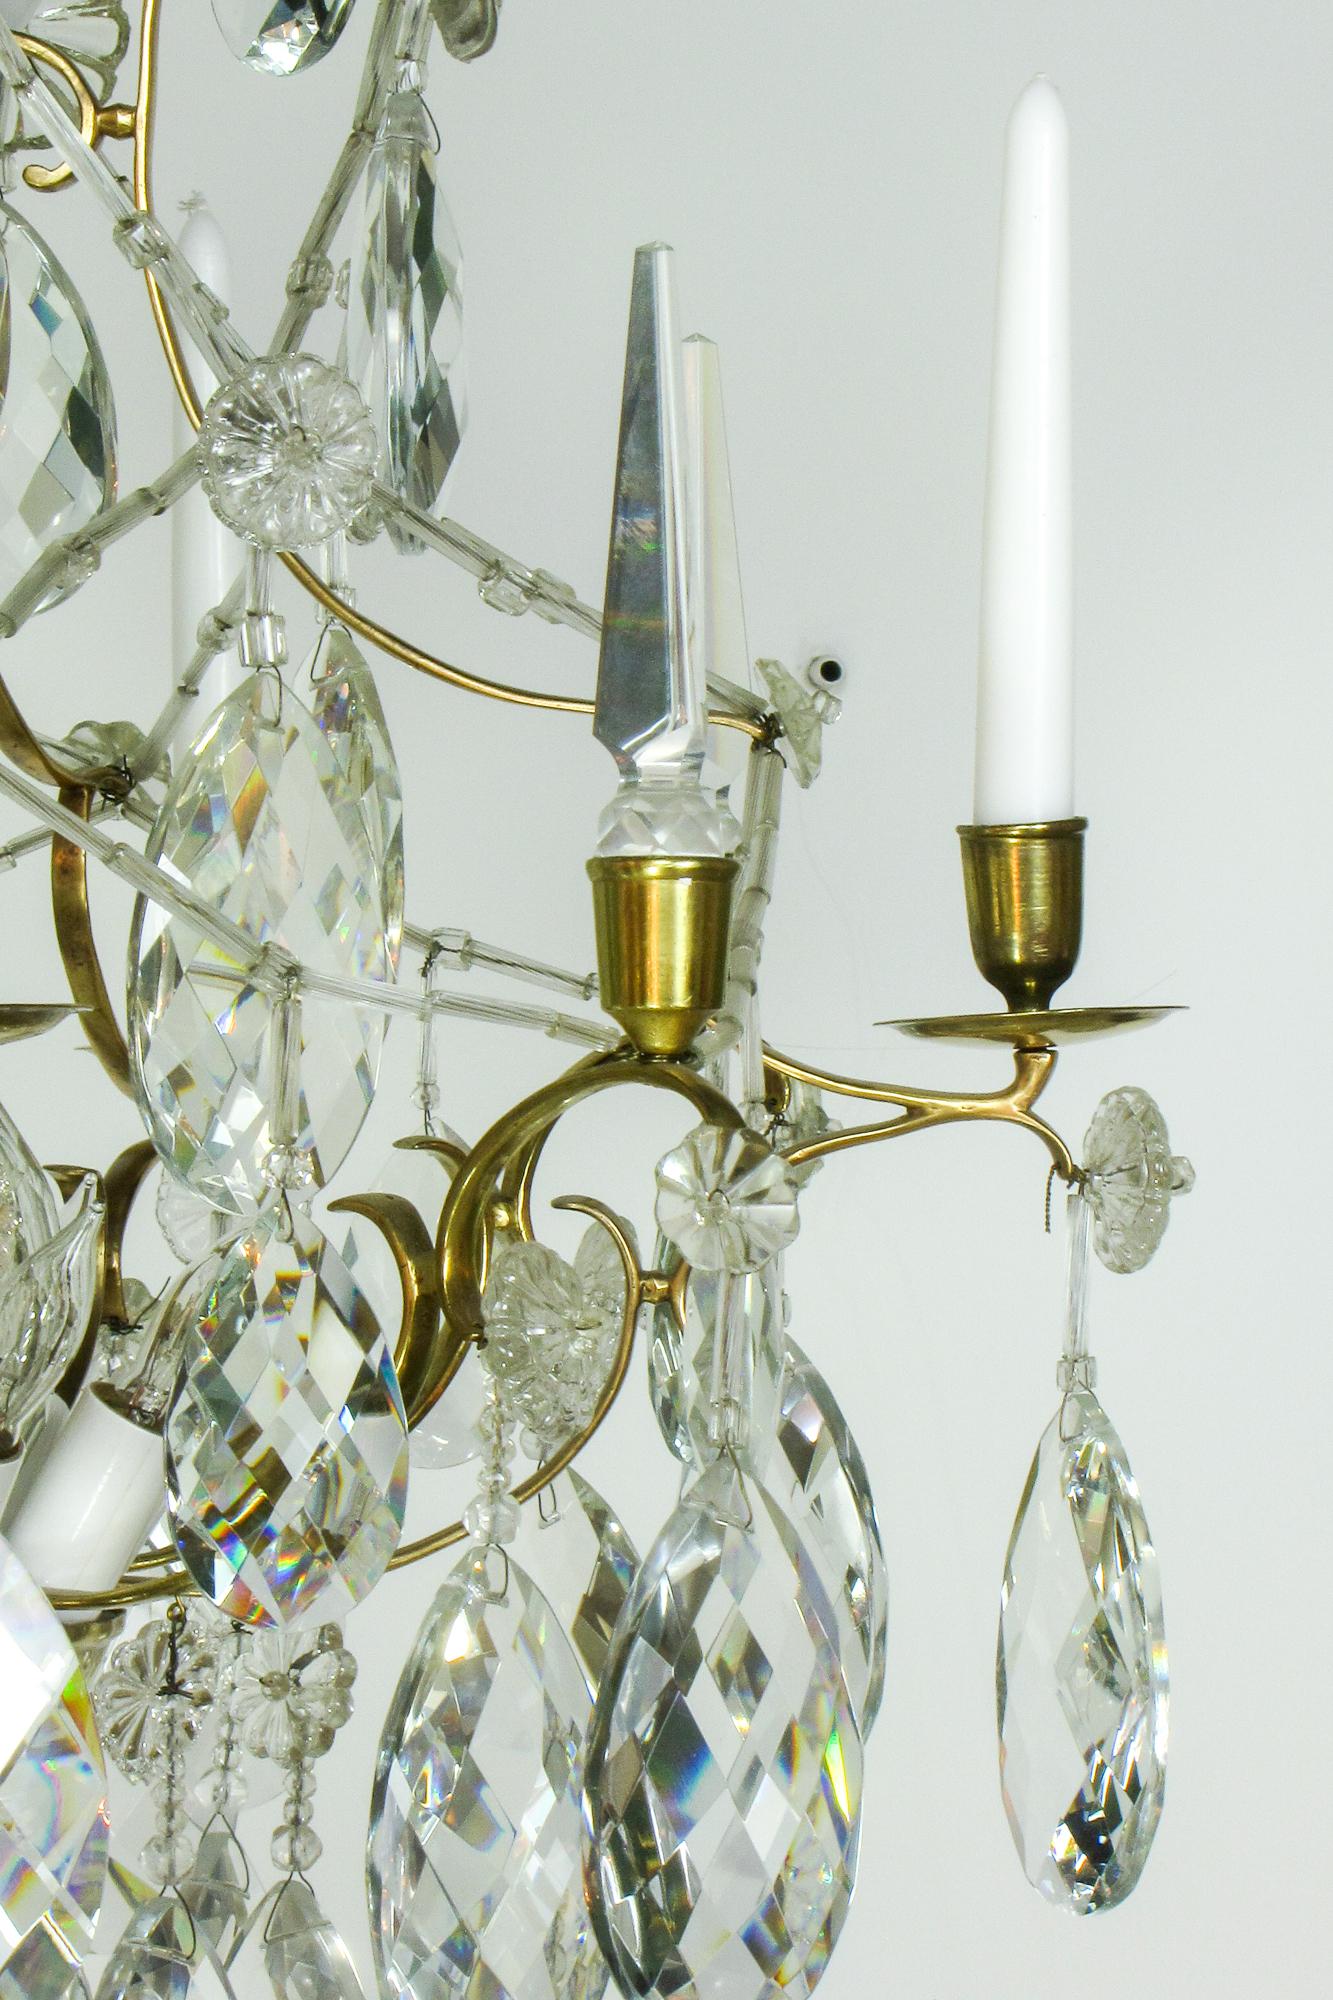 A dazzling crystal chandelier typical of 18th Century Sweden.  The chandelier has a delicate brass frame likely made in france then imported to Sweden for crystals.  The crystals are large swedish cut with oversized crystal ball stem pieces and